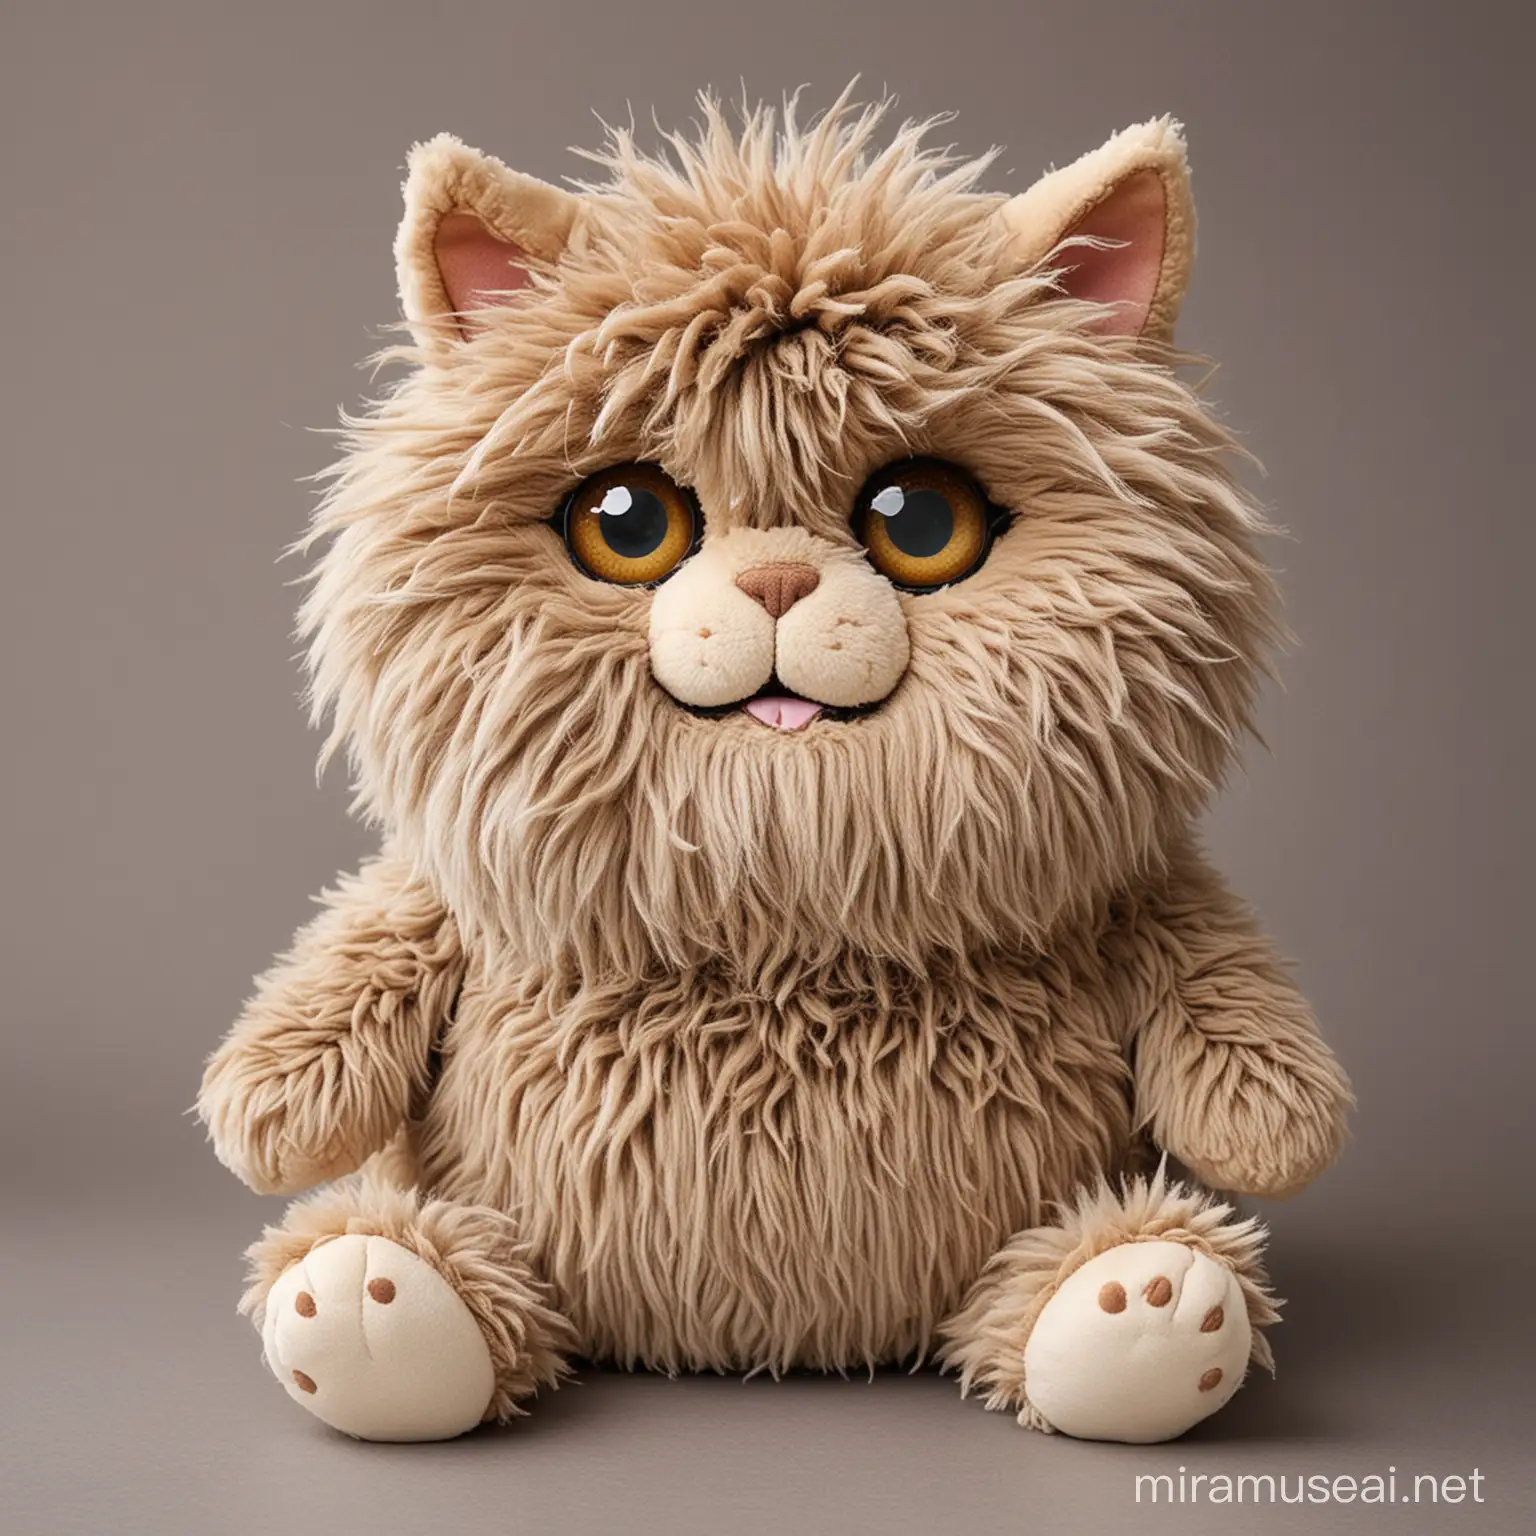 Design a soft  plush toy  a messy shaggy haired fat cat , ugly  with big eyes . Cute and cuddly . Big body, small arms and legs . Sitting 